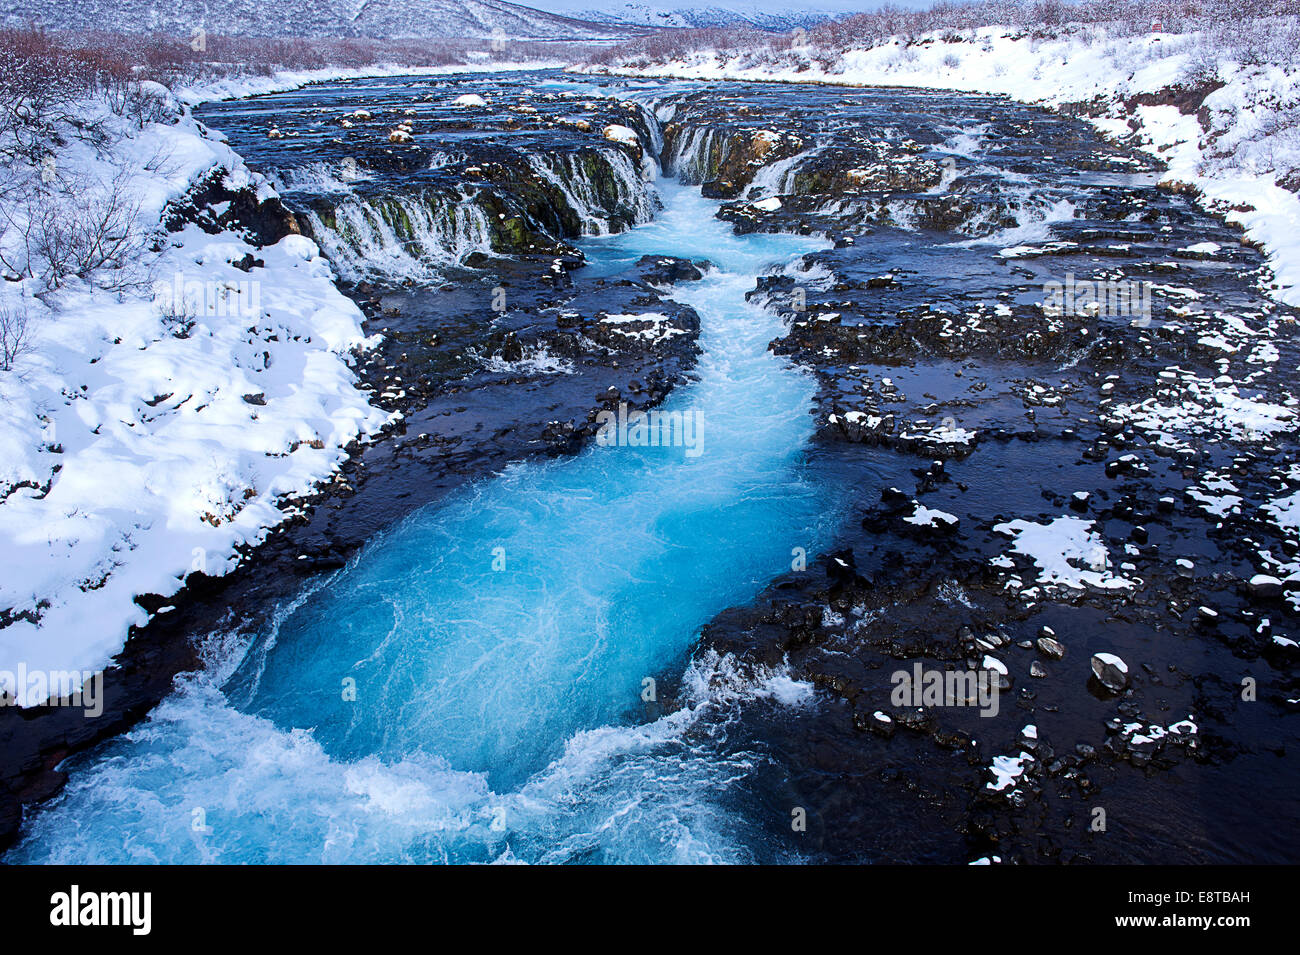 River flowing from waterfall, Bruarfoss, Sudhurland, Iceland Stock Photo